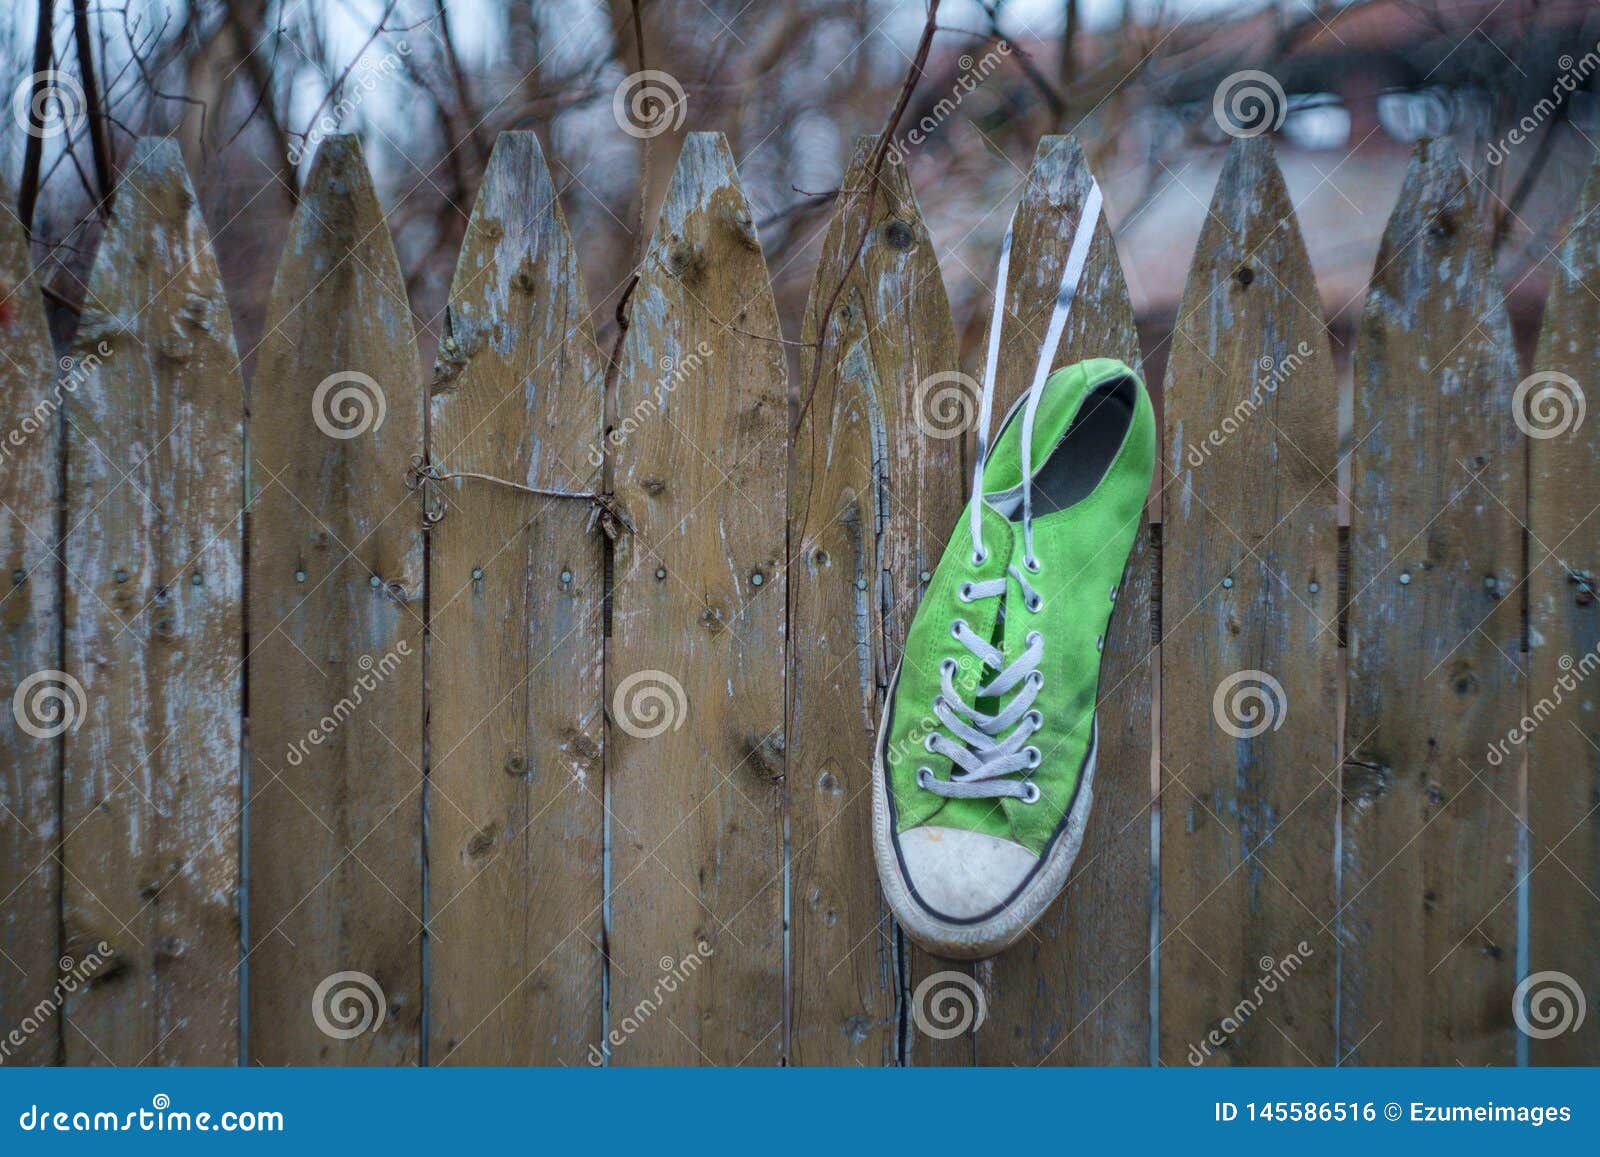 Old Worn Abandoned Shoes stock photo. Image of shoes - 145586516